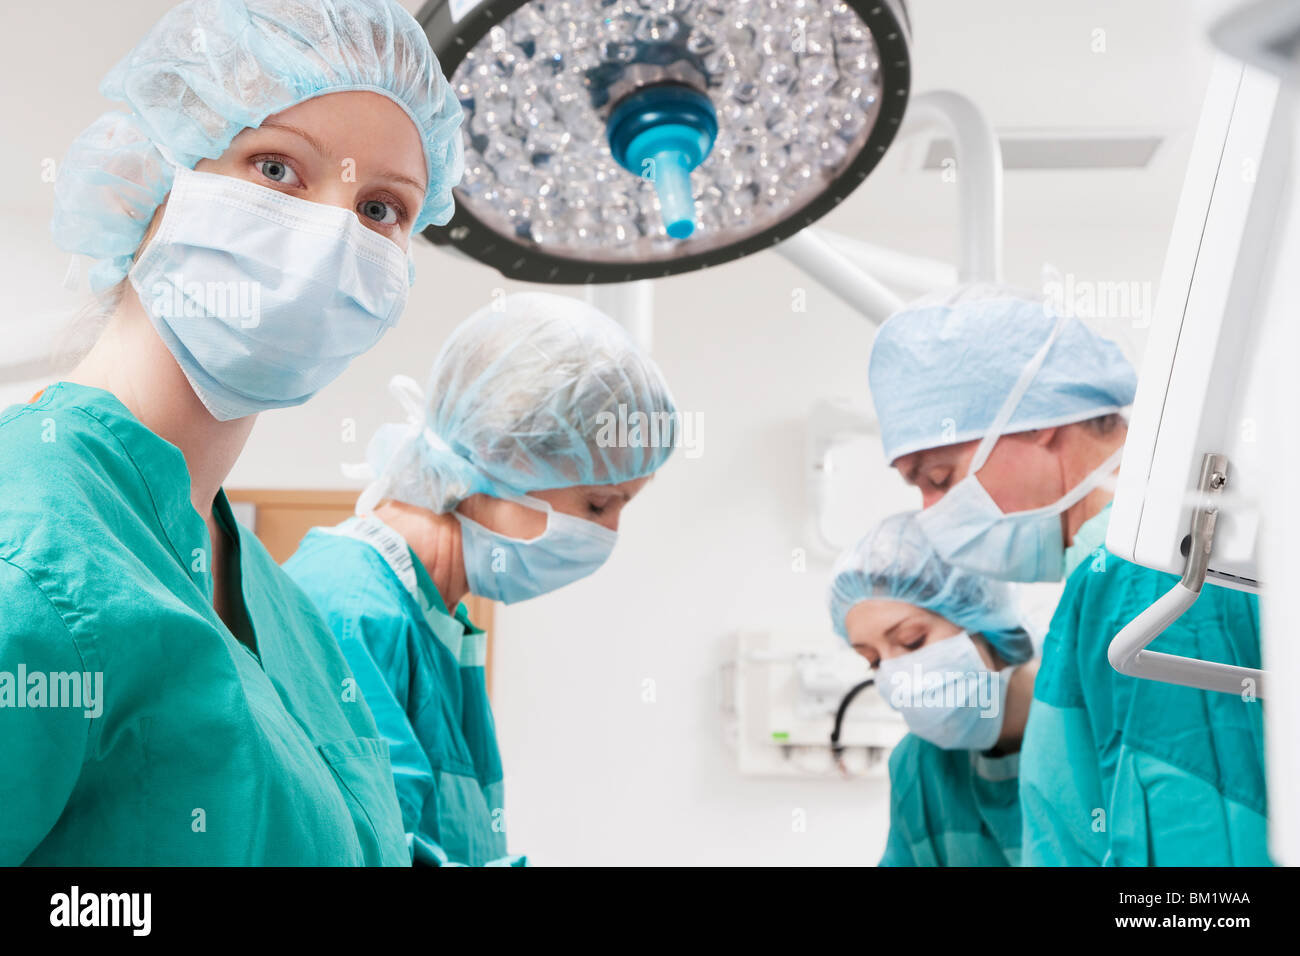 Surgeons performing a surgery in an operating room Stock Photo